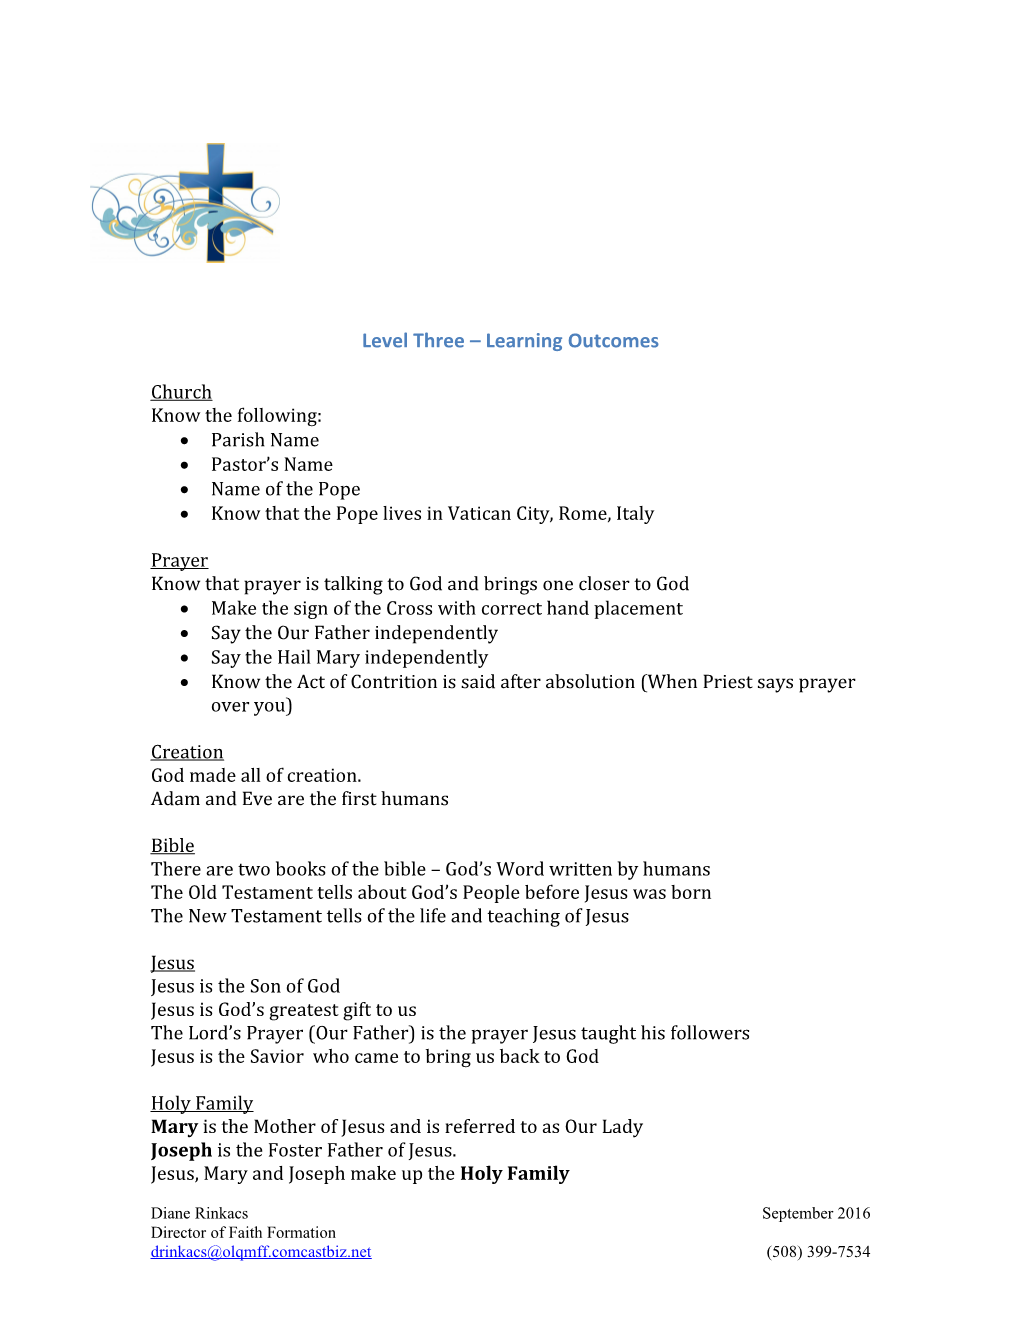 Level Three Learning Outcomes